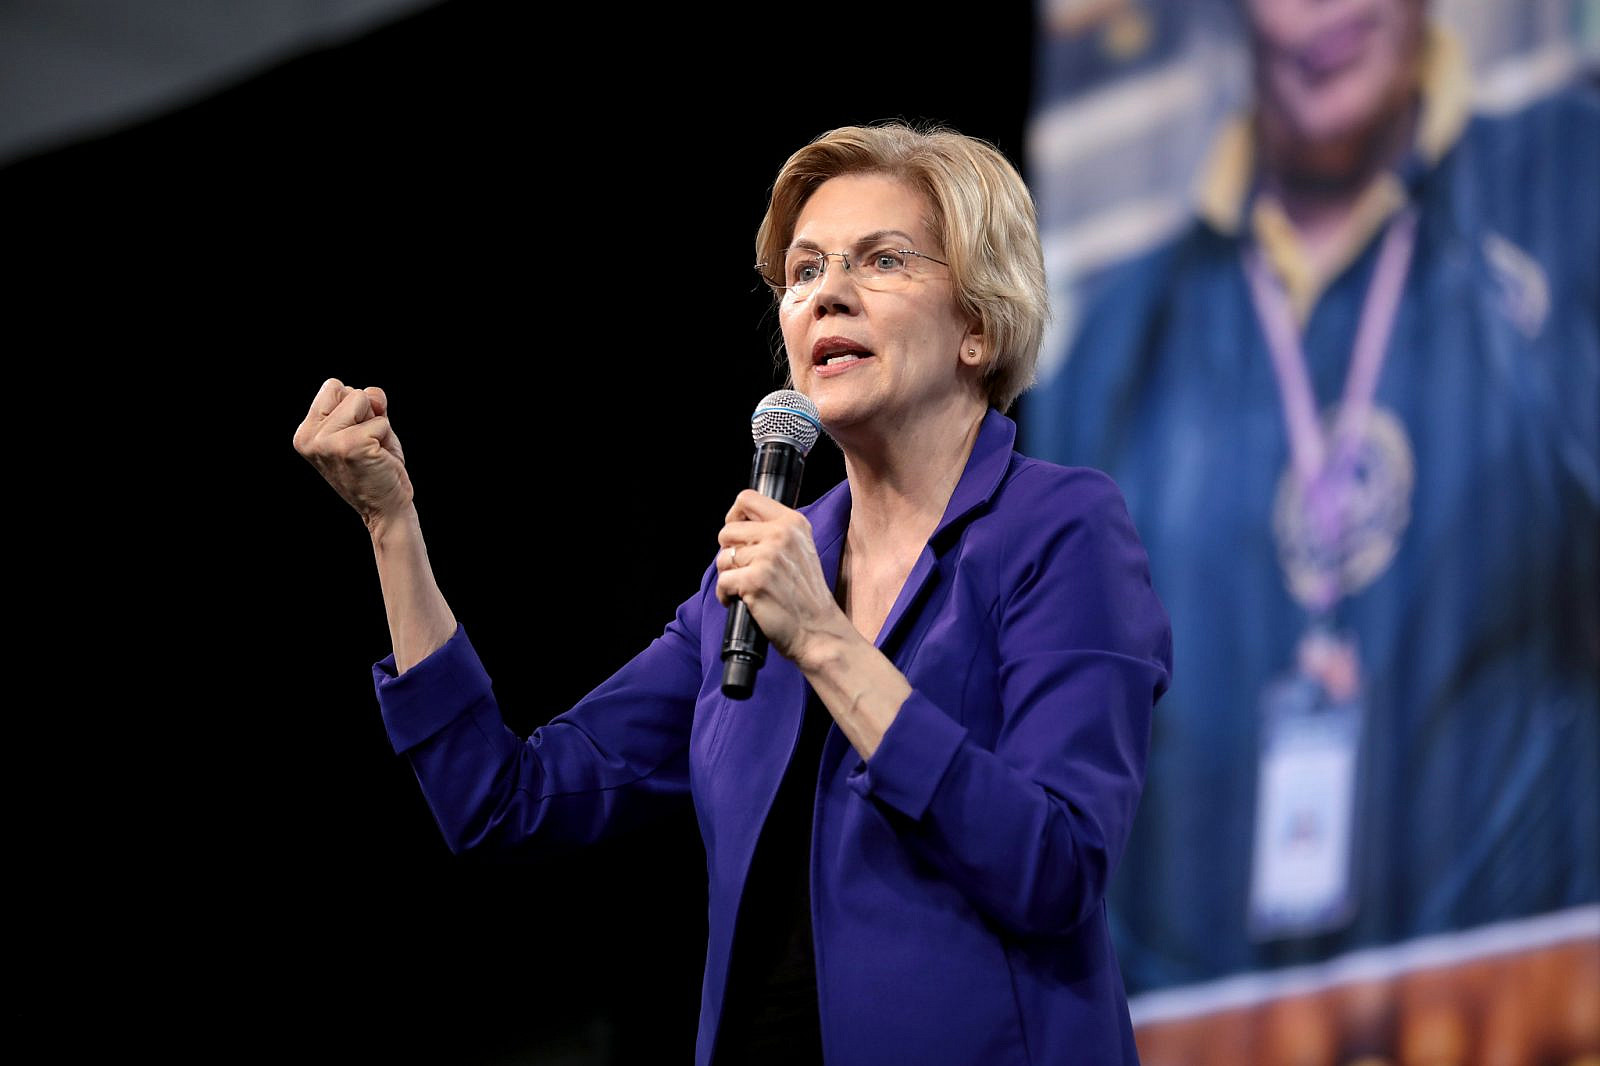 U.S. Senator Elizabeth Warren speaking at the 2019 National Forum on Wages and Working People hosted by the Center for the American Progress Action Fund and the SEIU in Las Vegas, Nevada. April 27, 2019. (Gage Skidmore/Flickr)